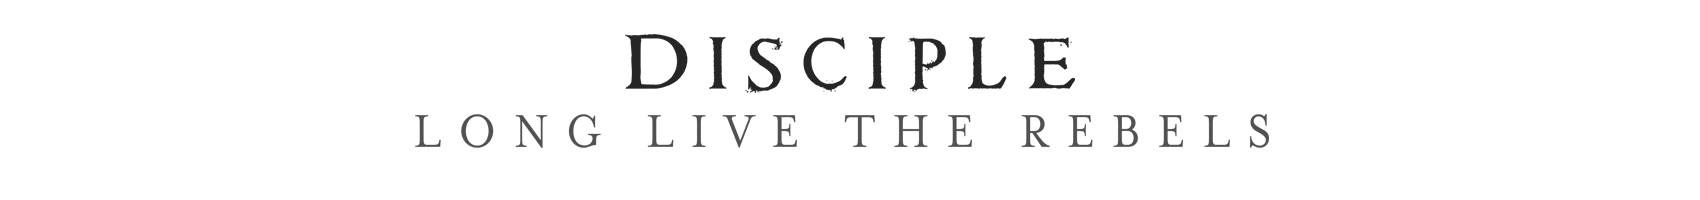 Disciple Band Logo - Disciple Message Board - Index page